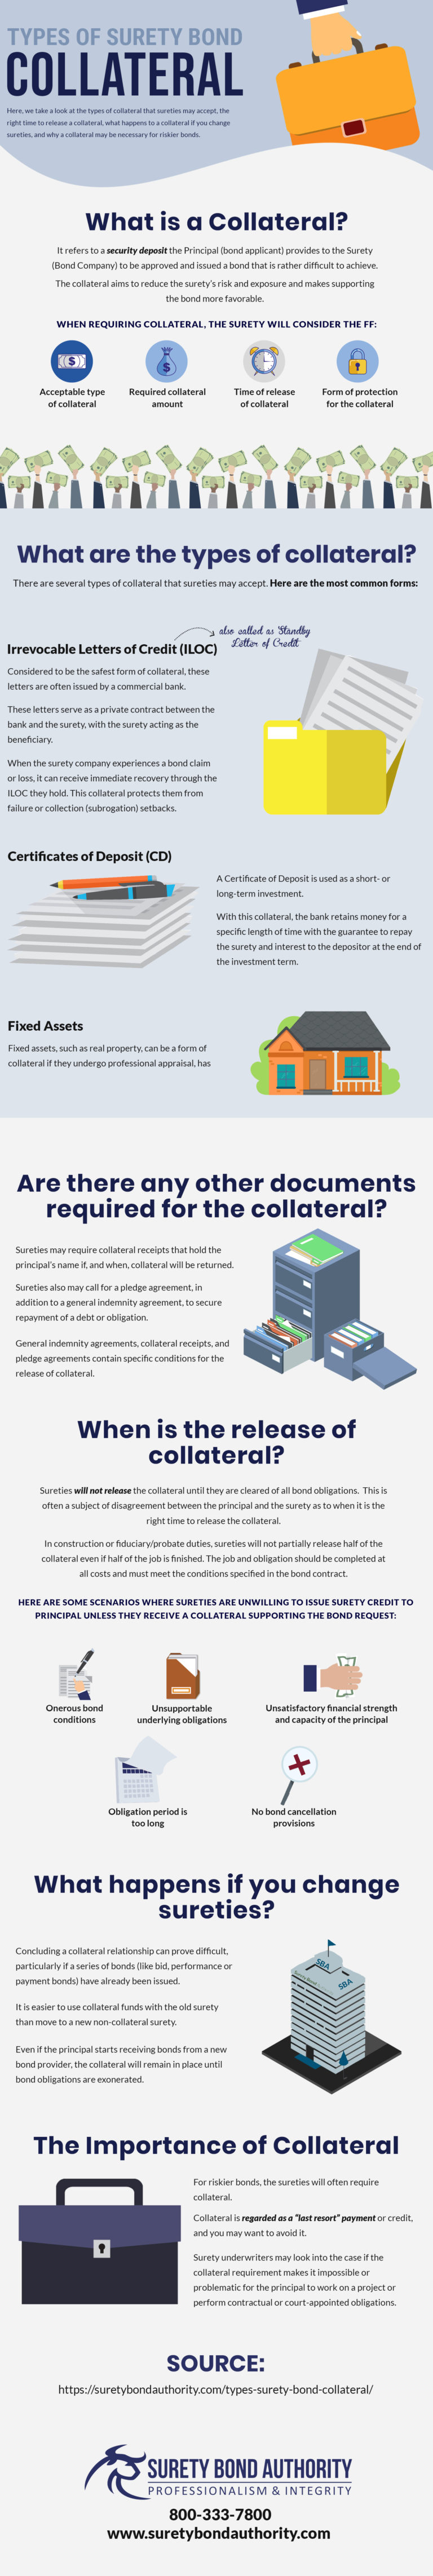 Types of Surety Bond Collateral | Surety Bond Authority